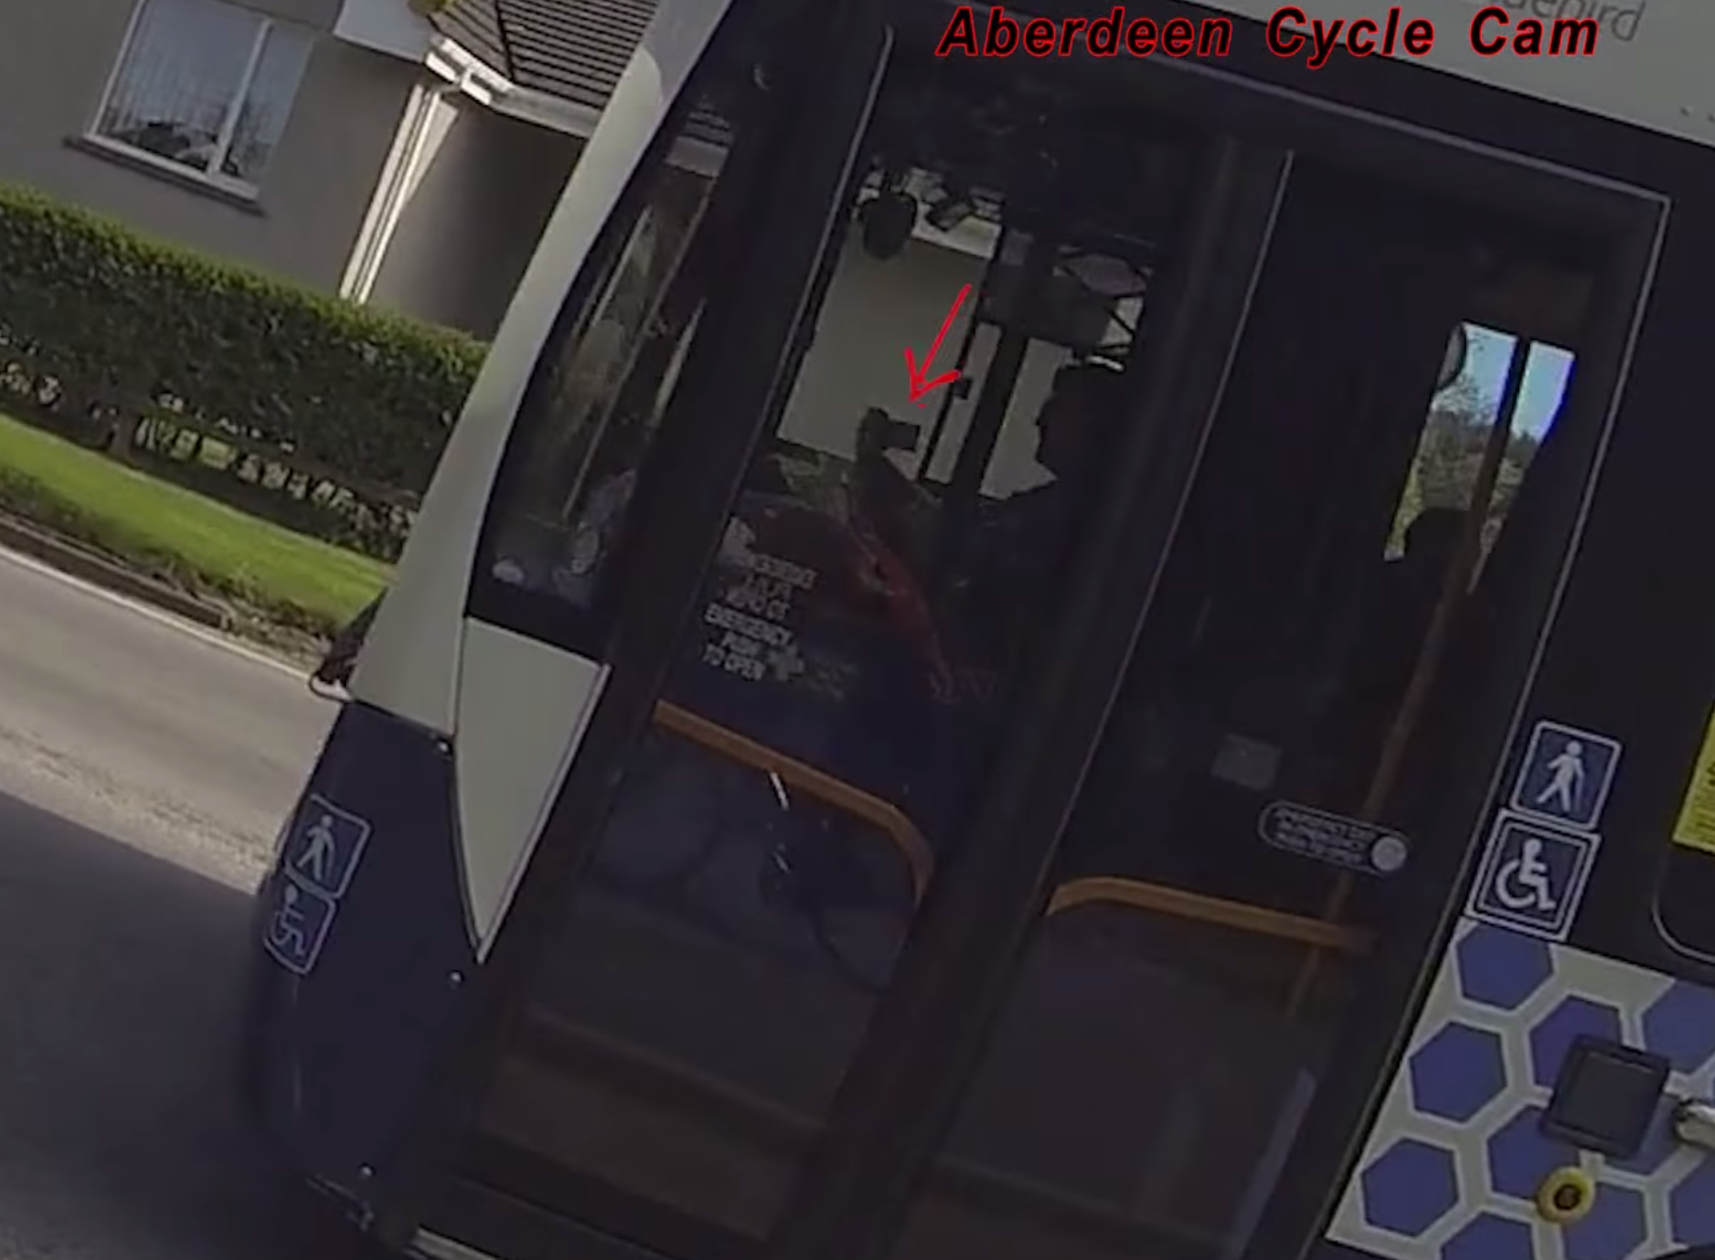 The Aberdeen bus driver is caught on camera